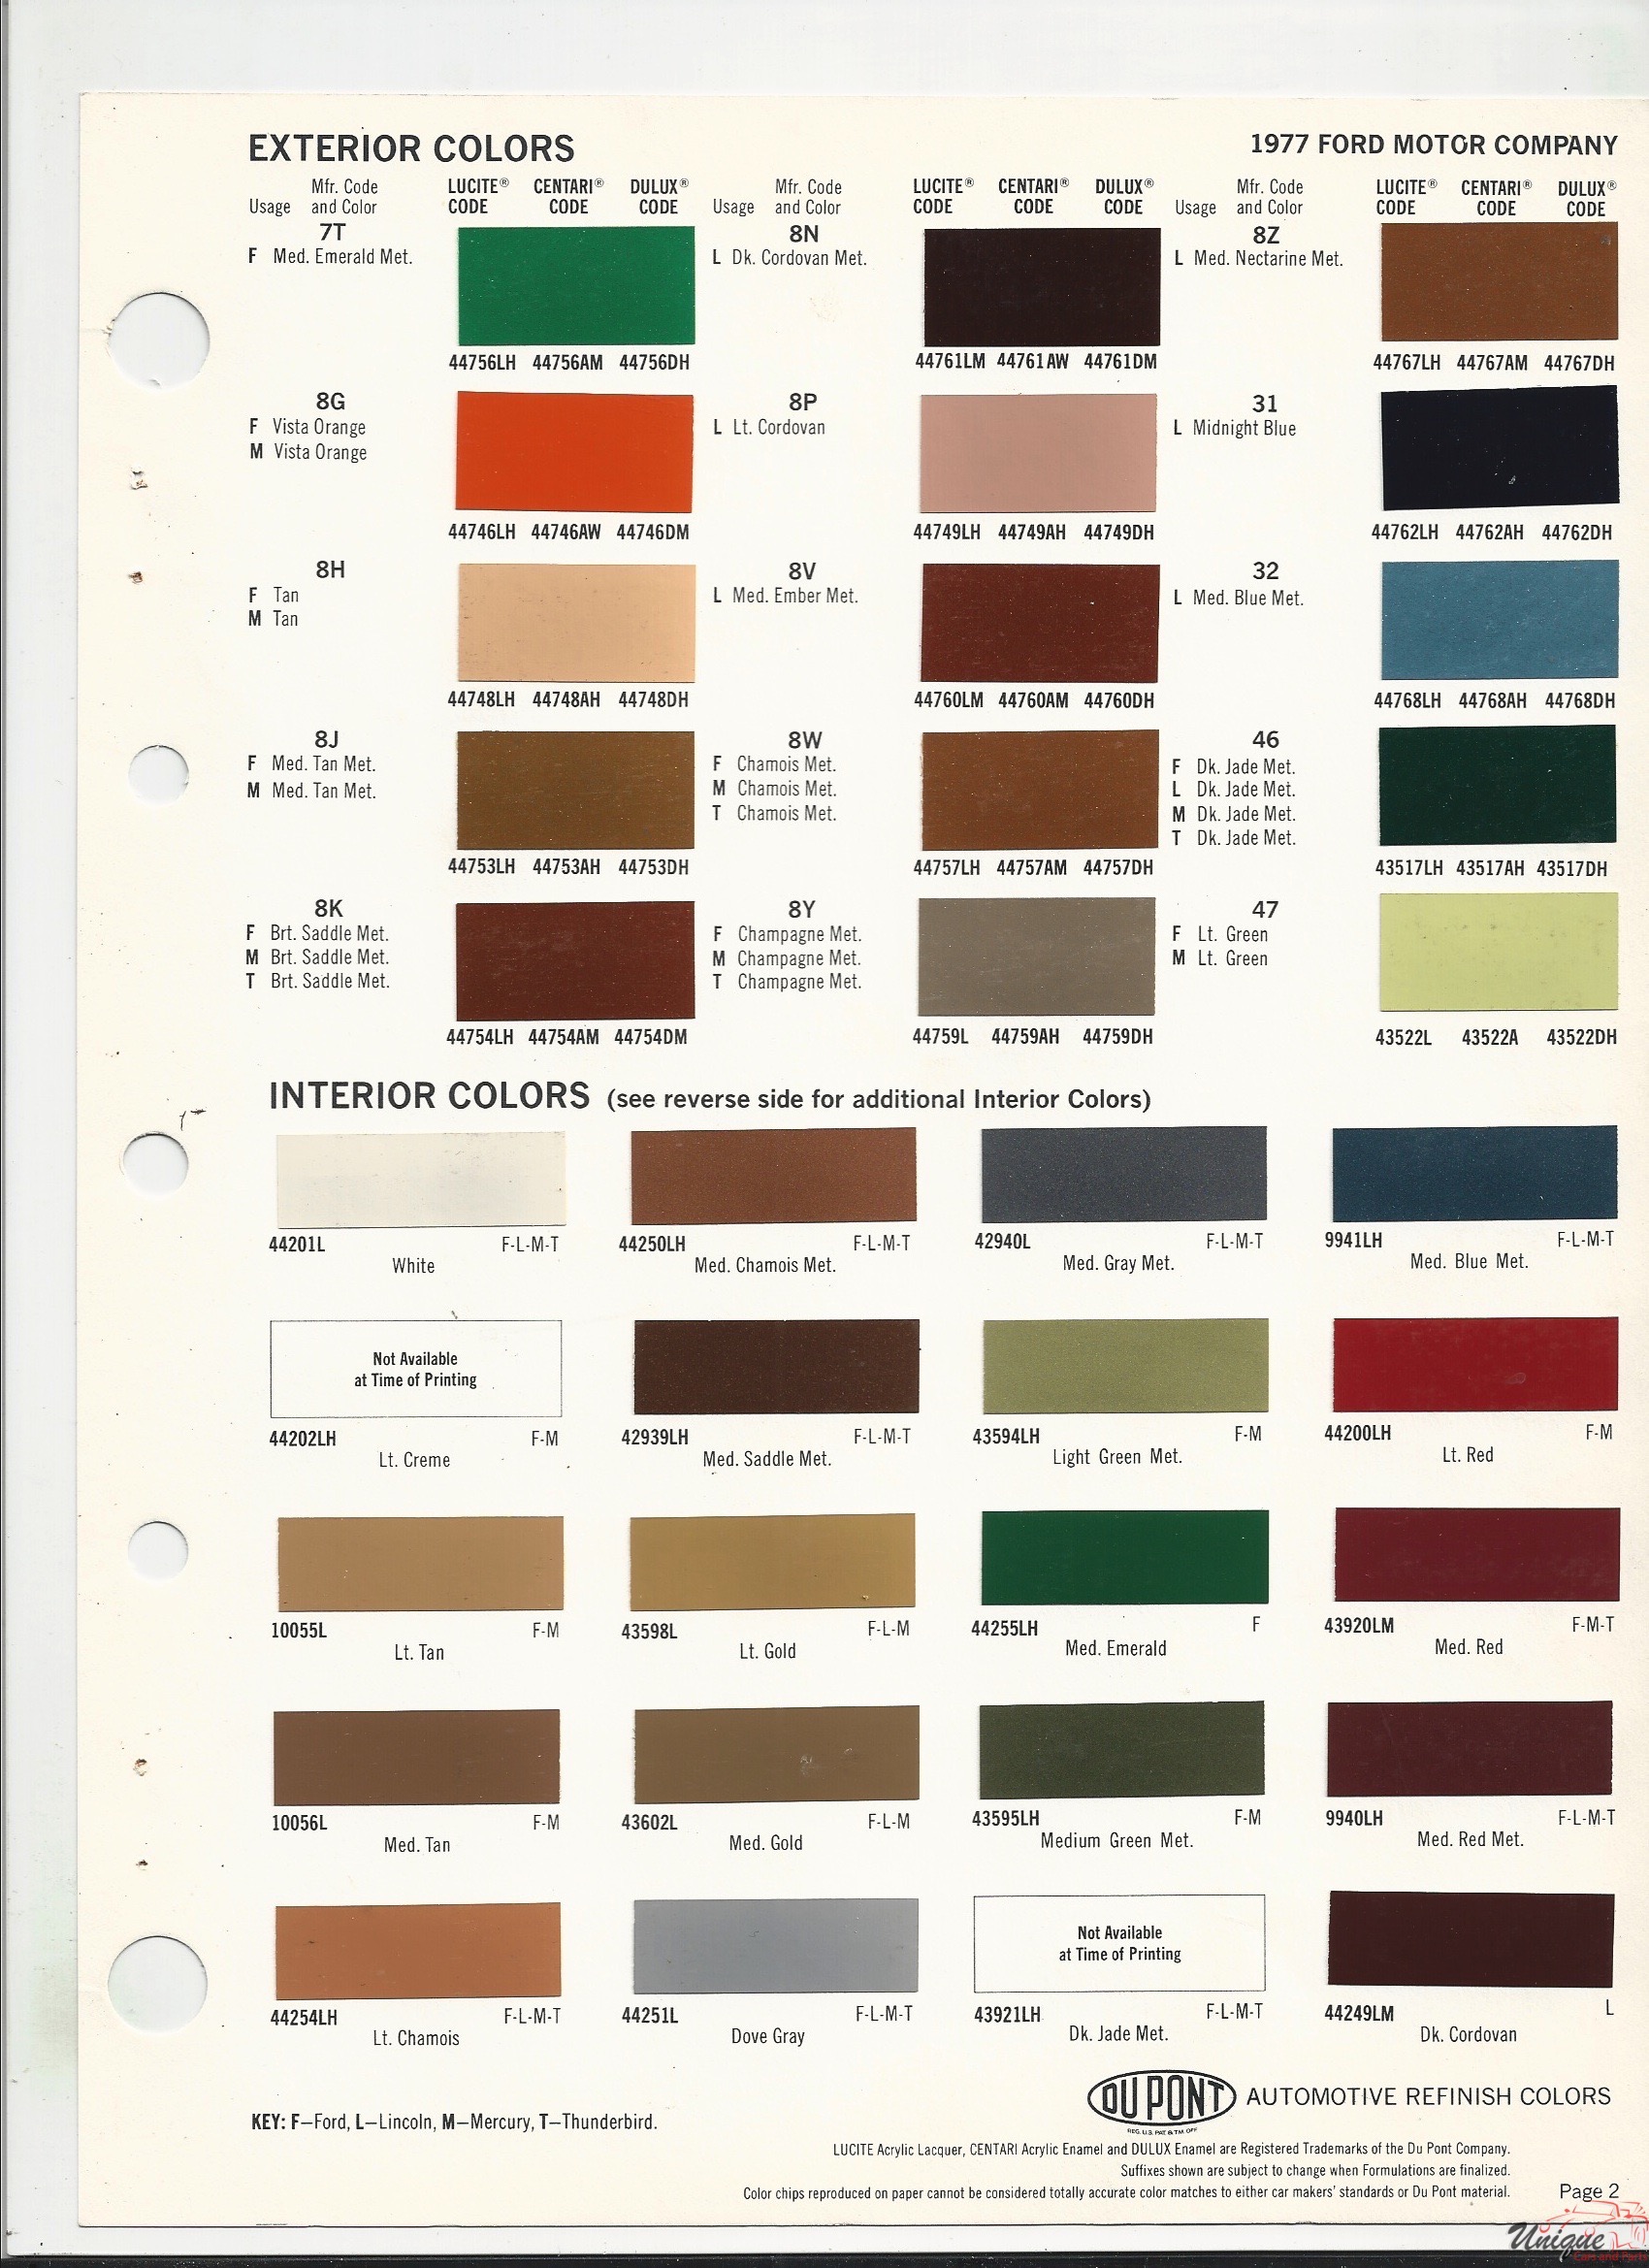 1977 Ford-2 Paint Charts